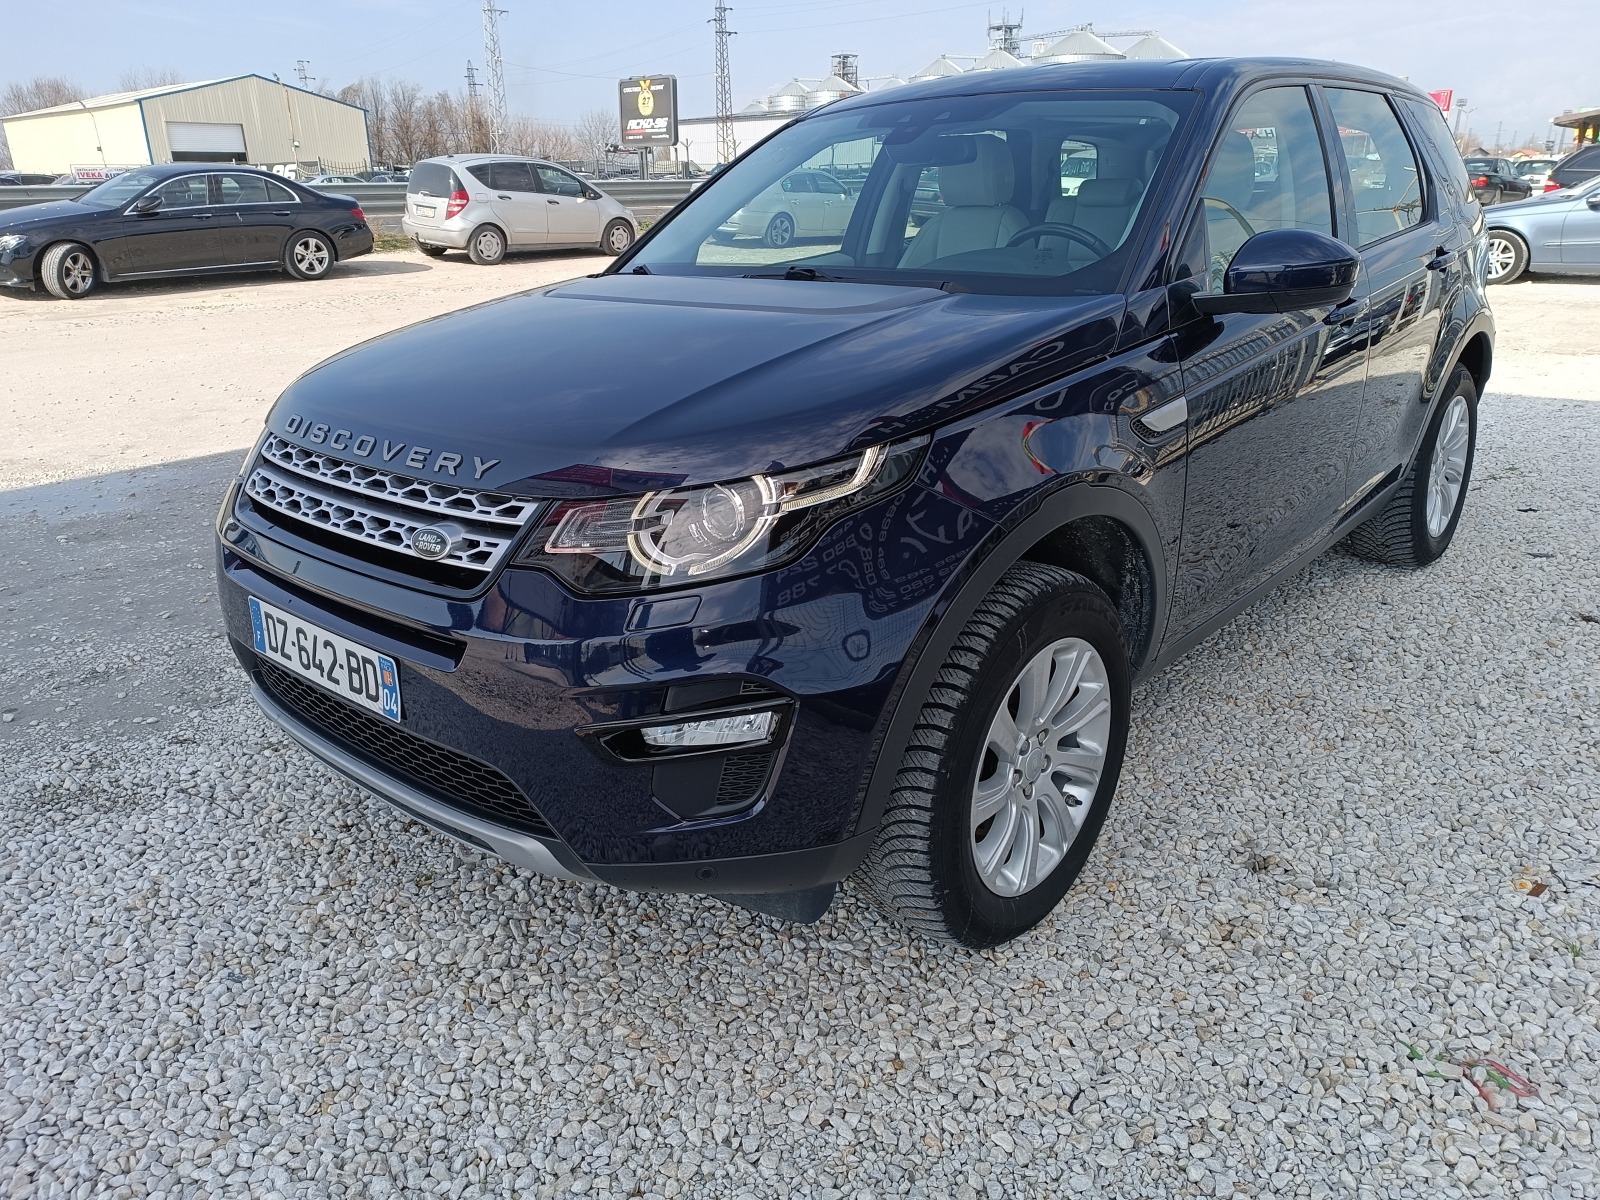 Land Rover Discovery 2.0 D* * * LEASING* * * 20% * БАРТЕР*  - изображение 1